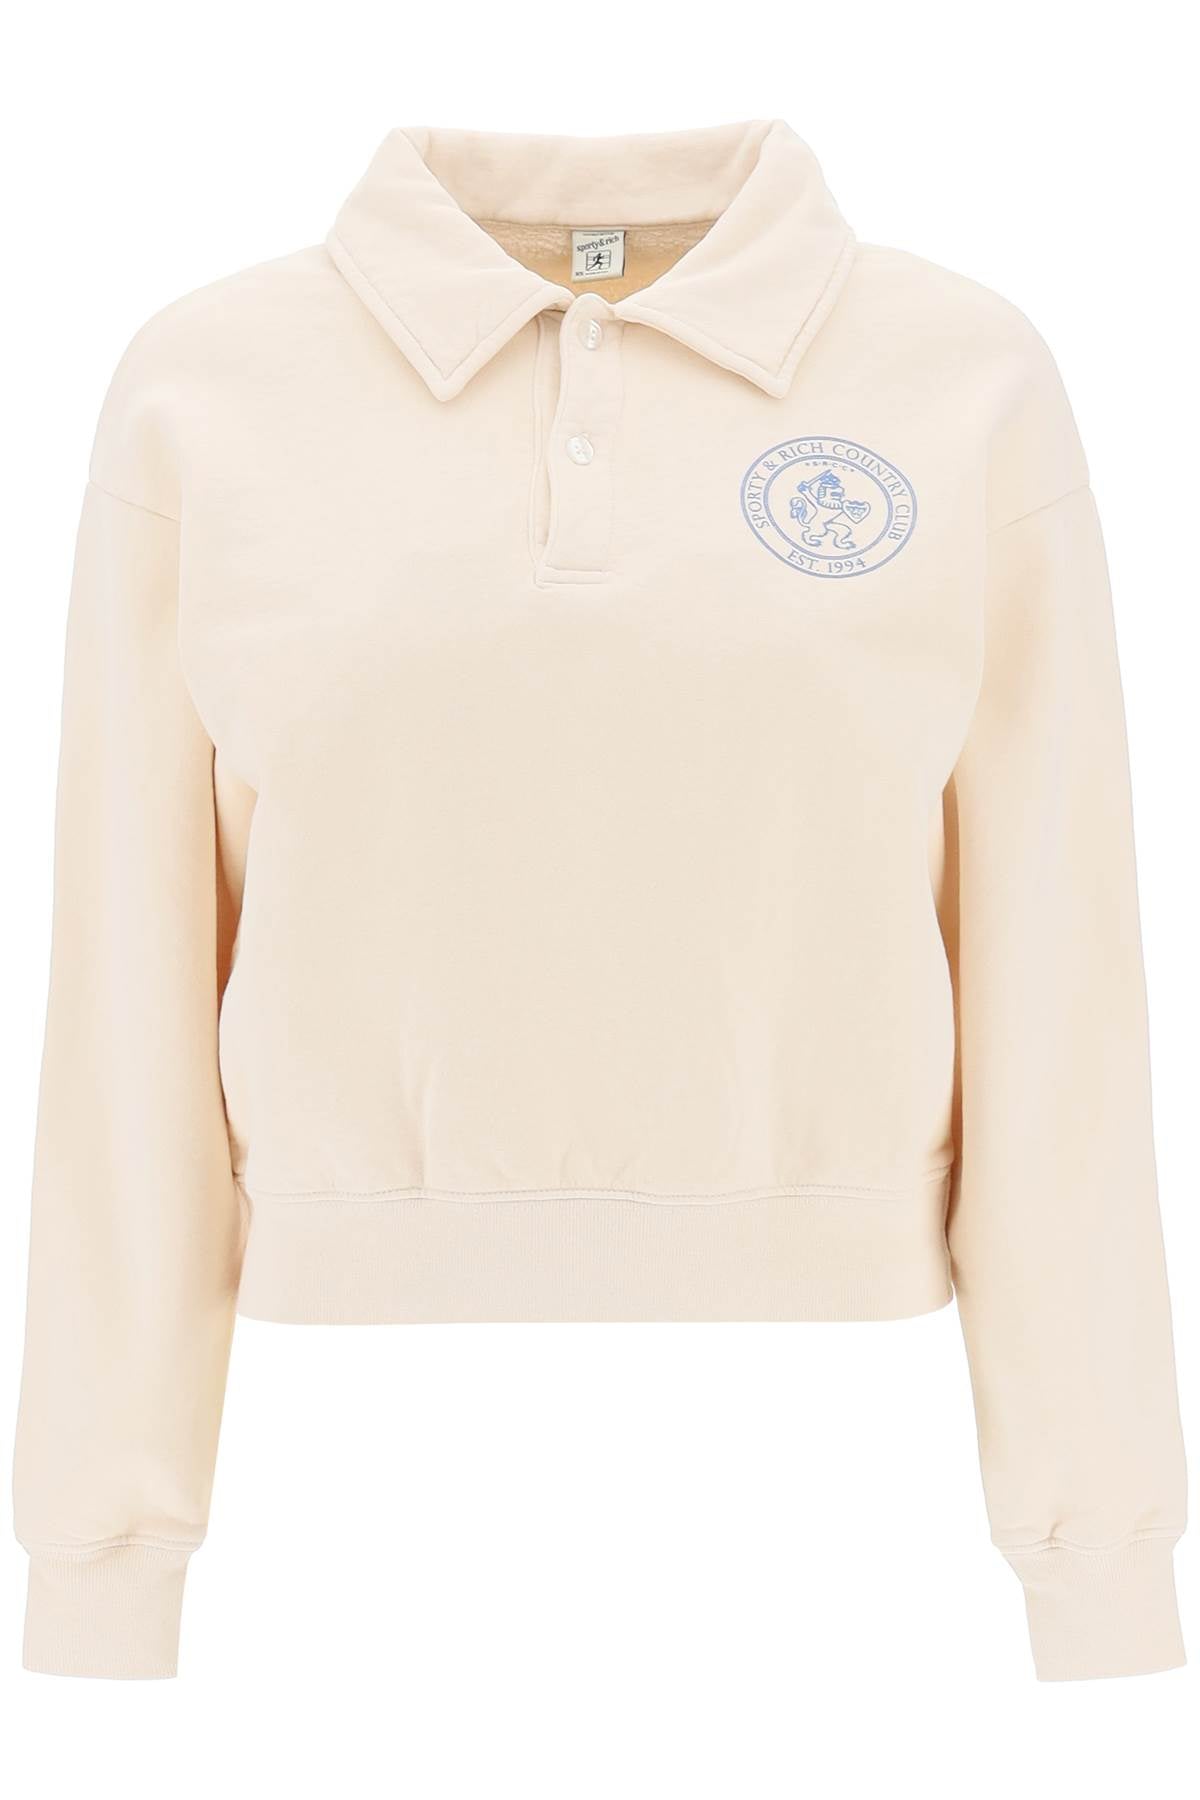 SPORTY AND RICH LION CREST SWEATSHIRT WITH COLLAR